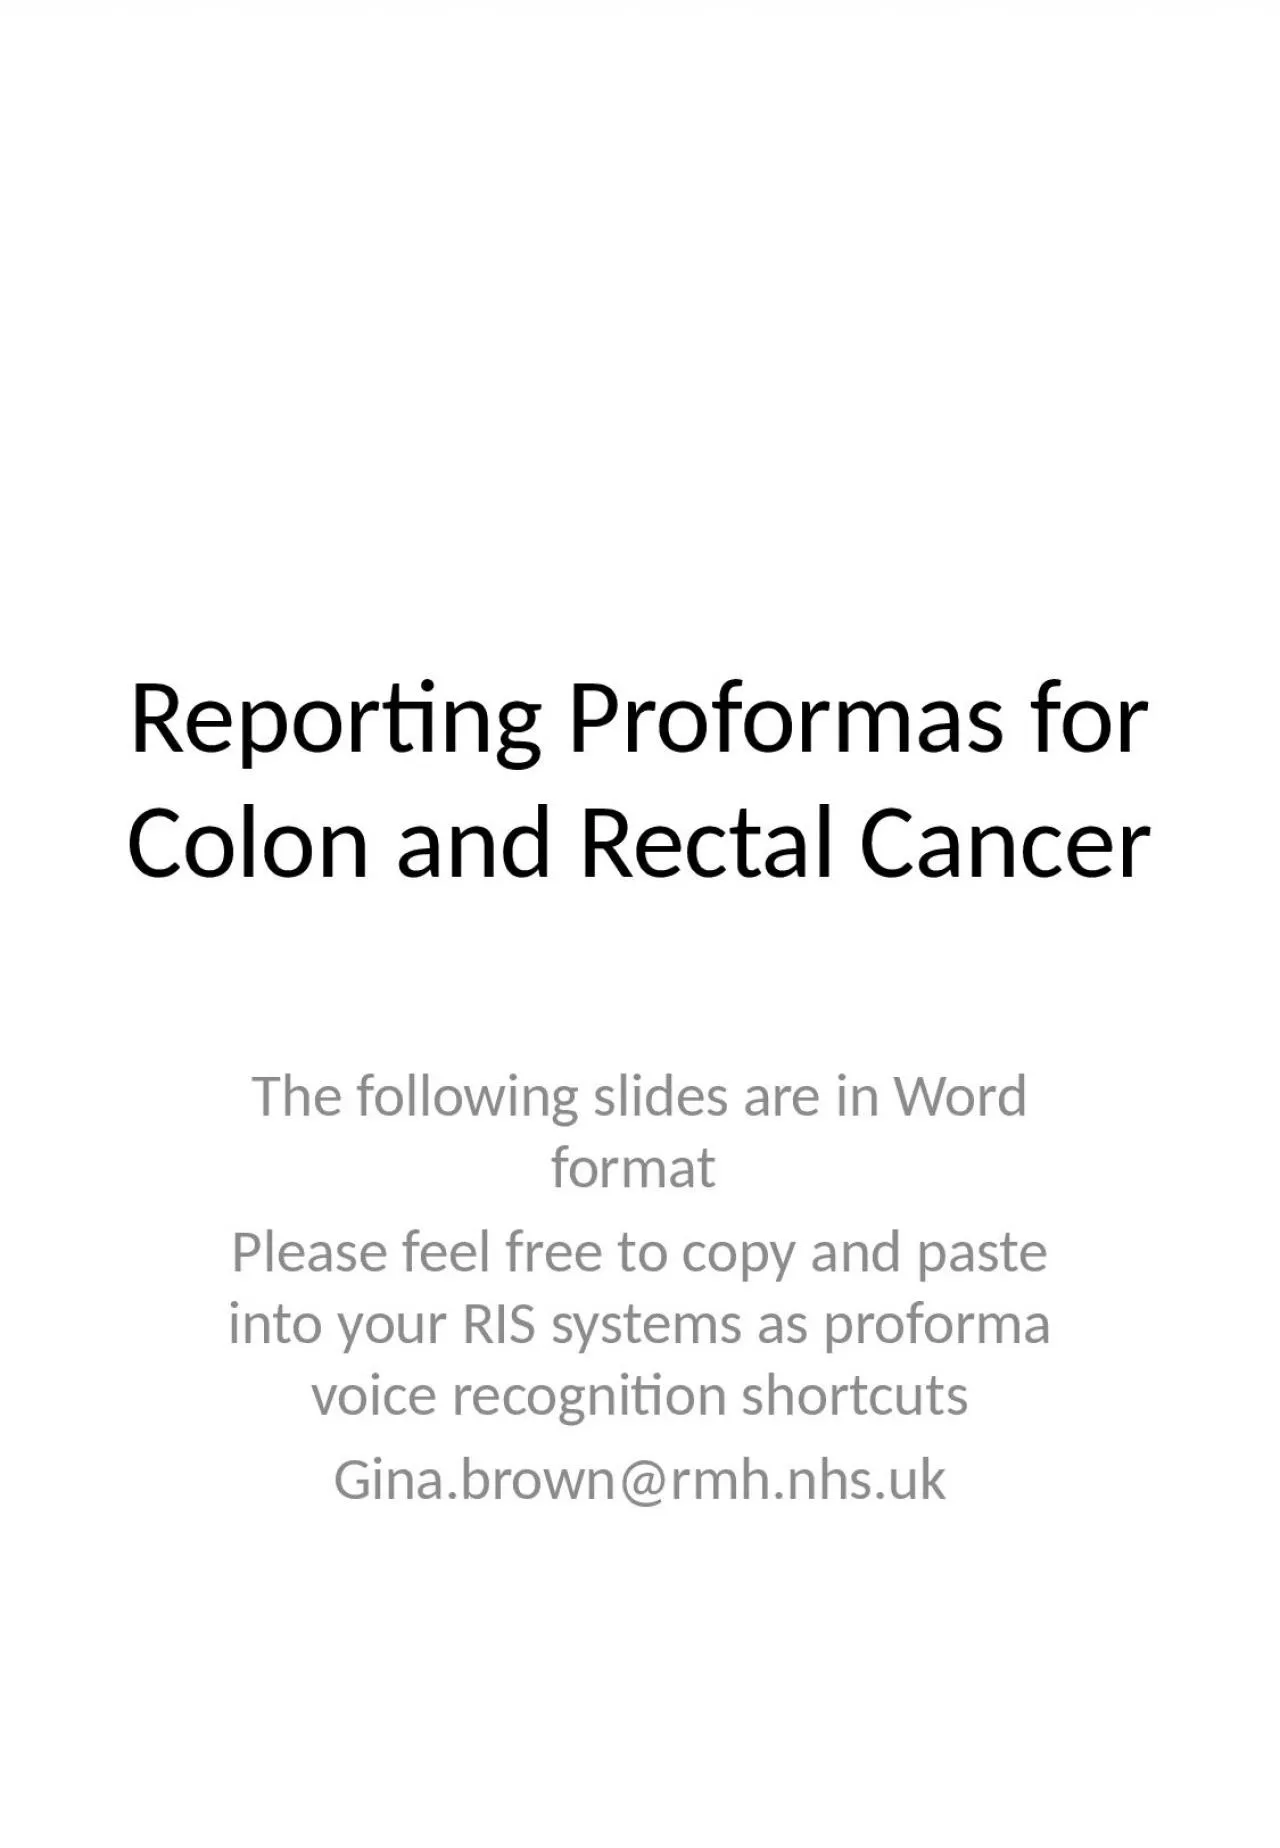 Reporting  P roformas  for Colon and Rectal Cancer